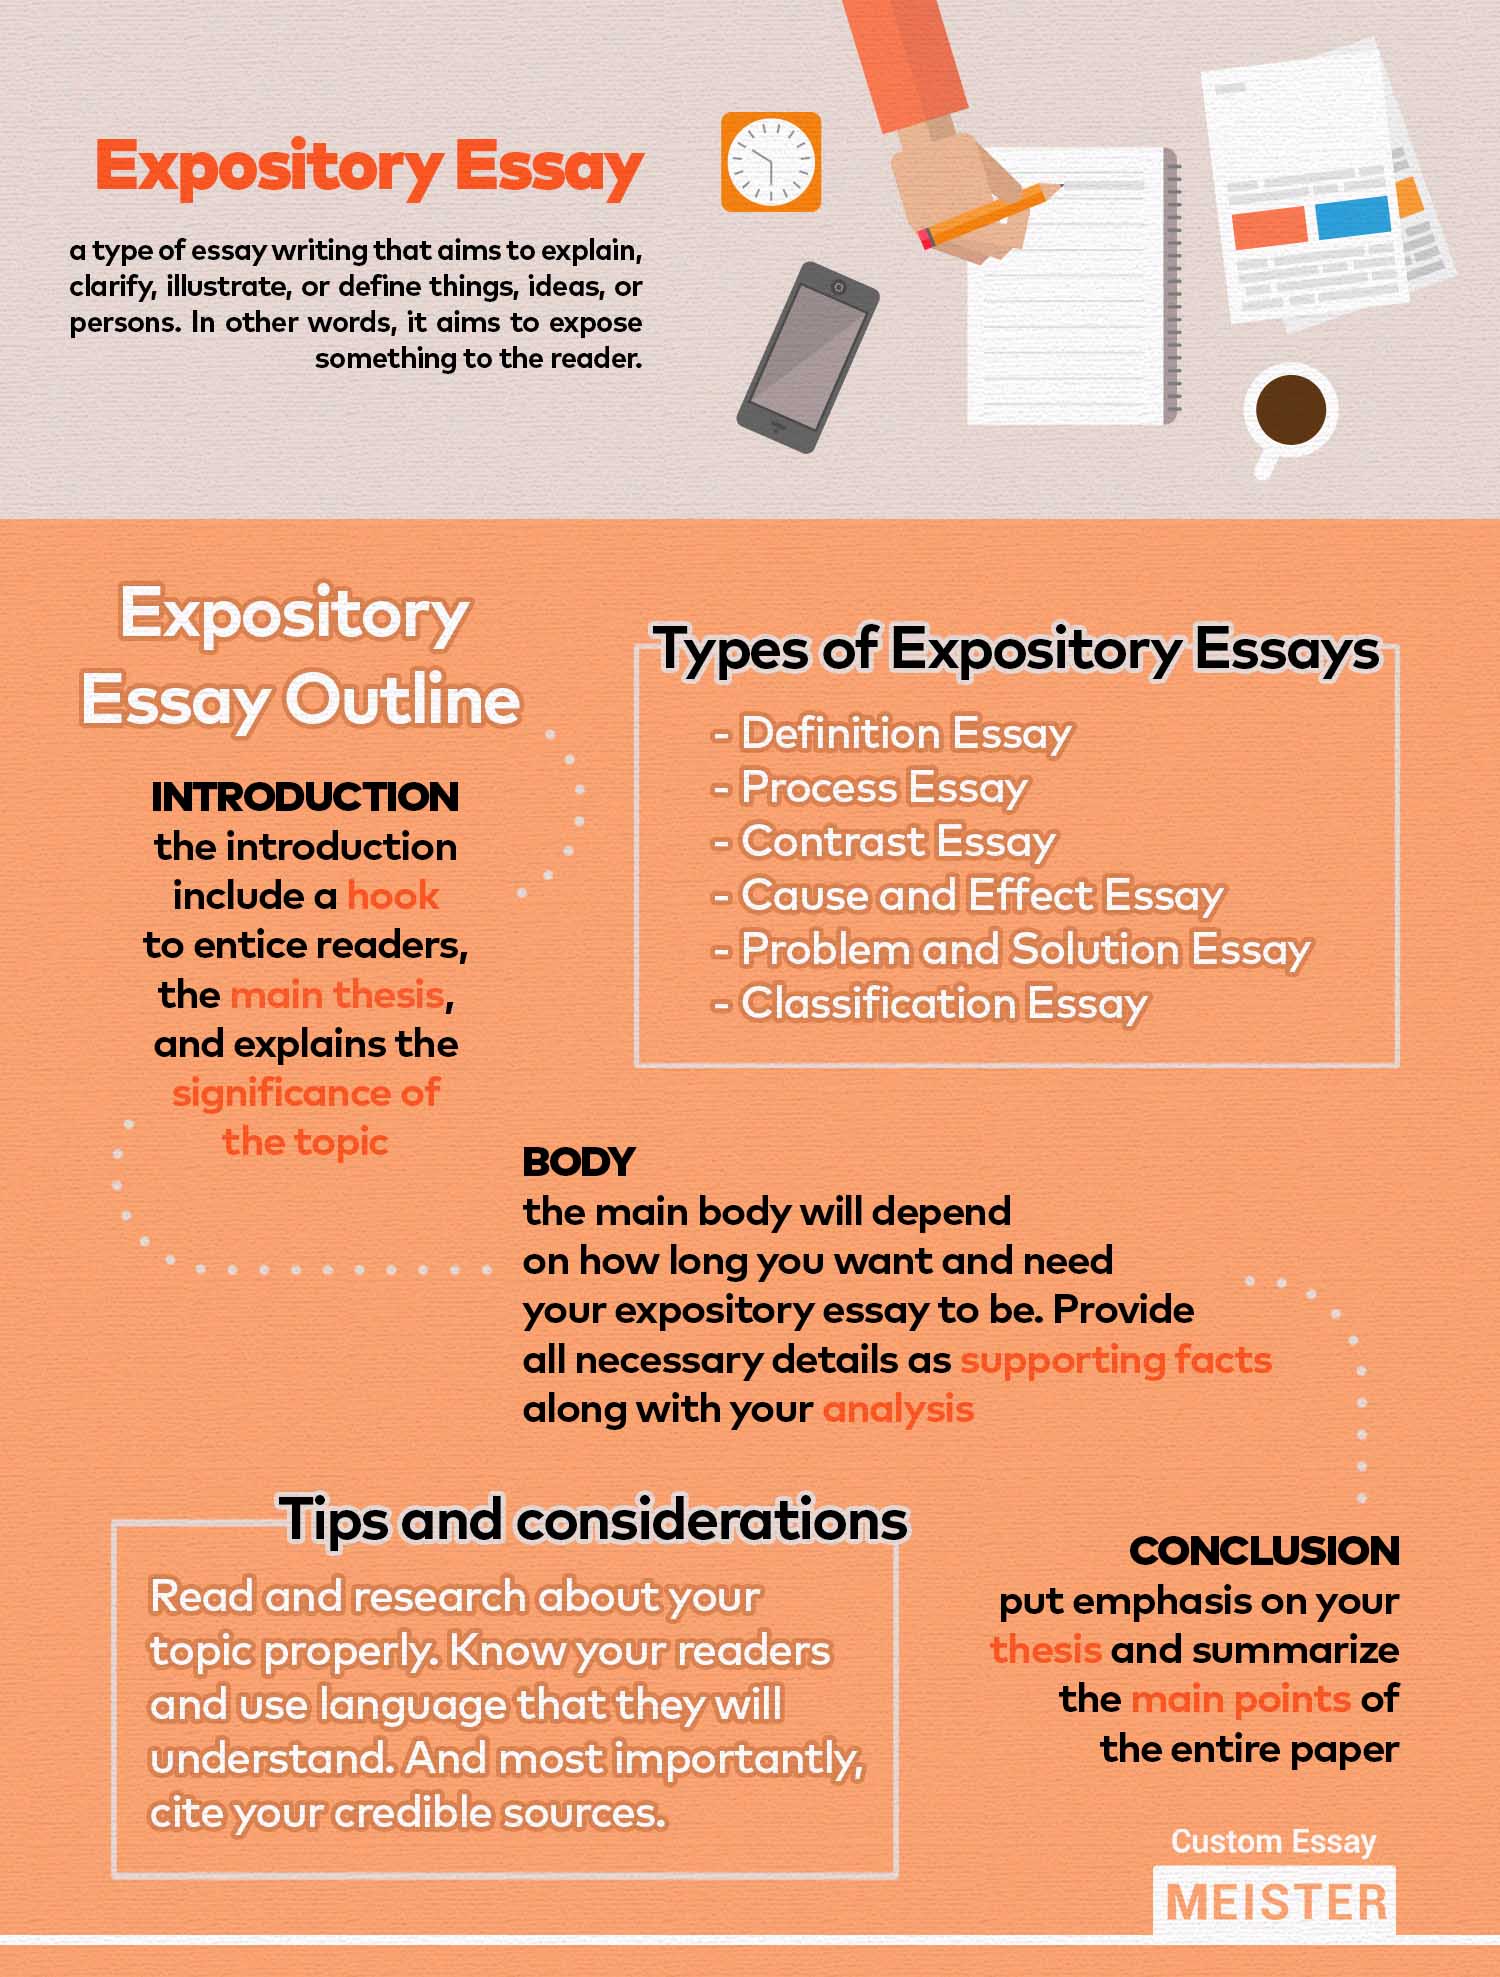 how to start introduction in expository essay